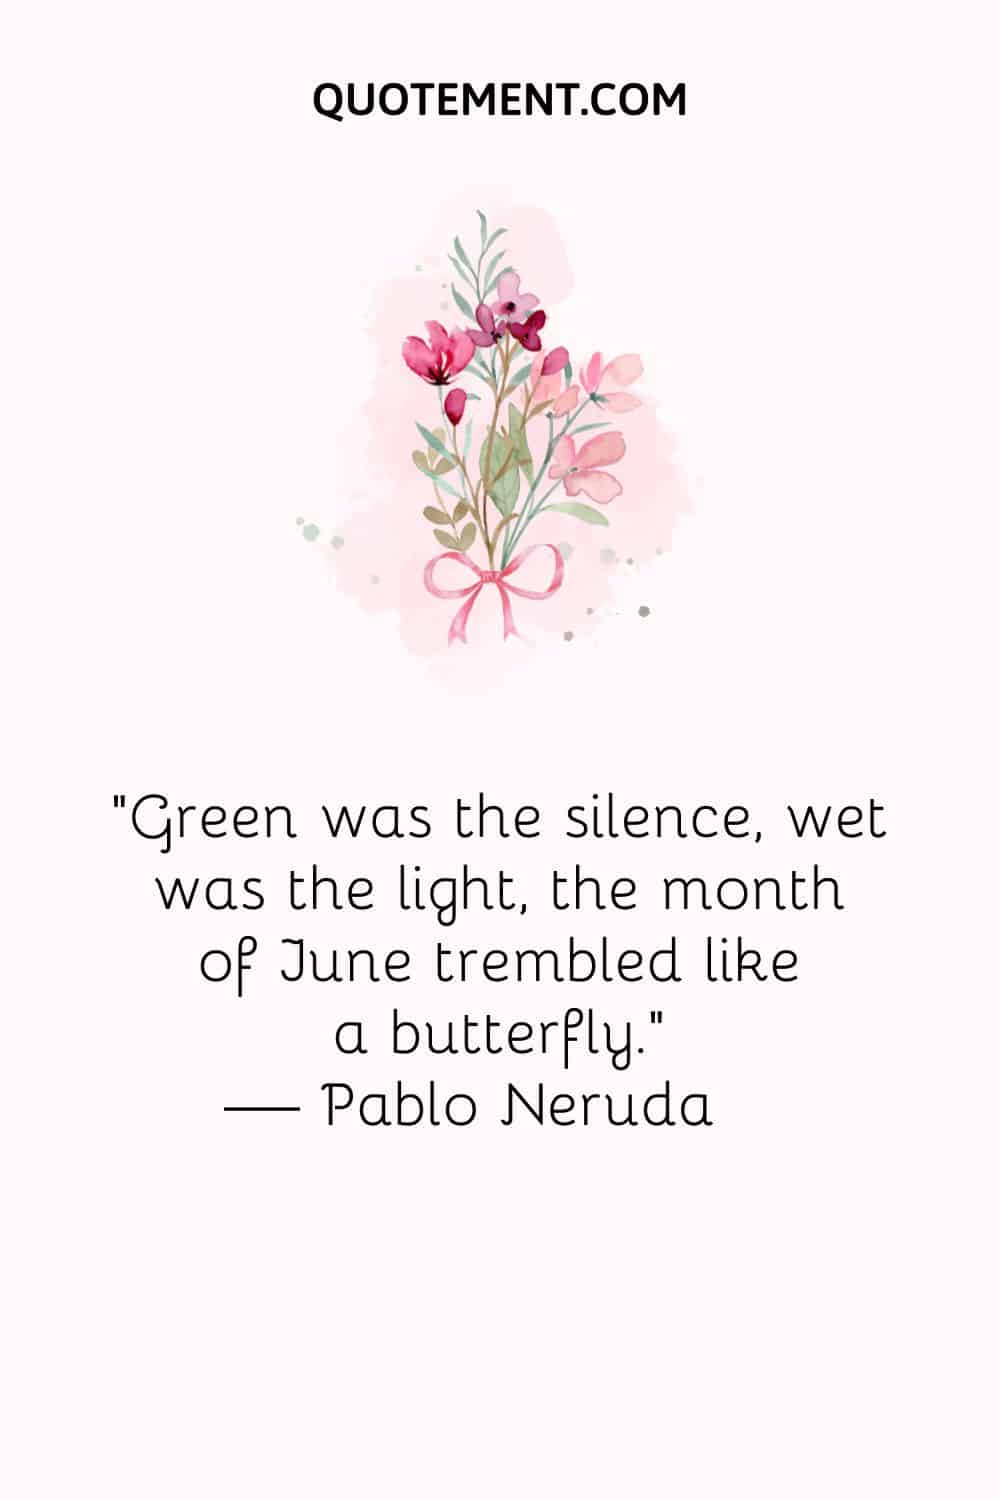 “Green was the silence, wet was the light, the month of June trembled like a butterfly.” — Pablo Neruda